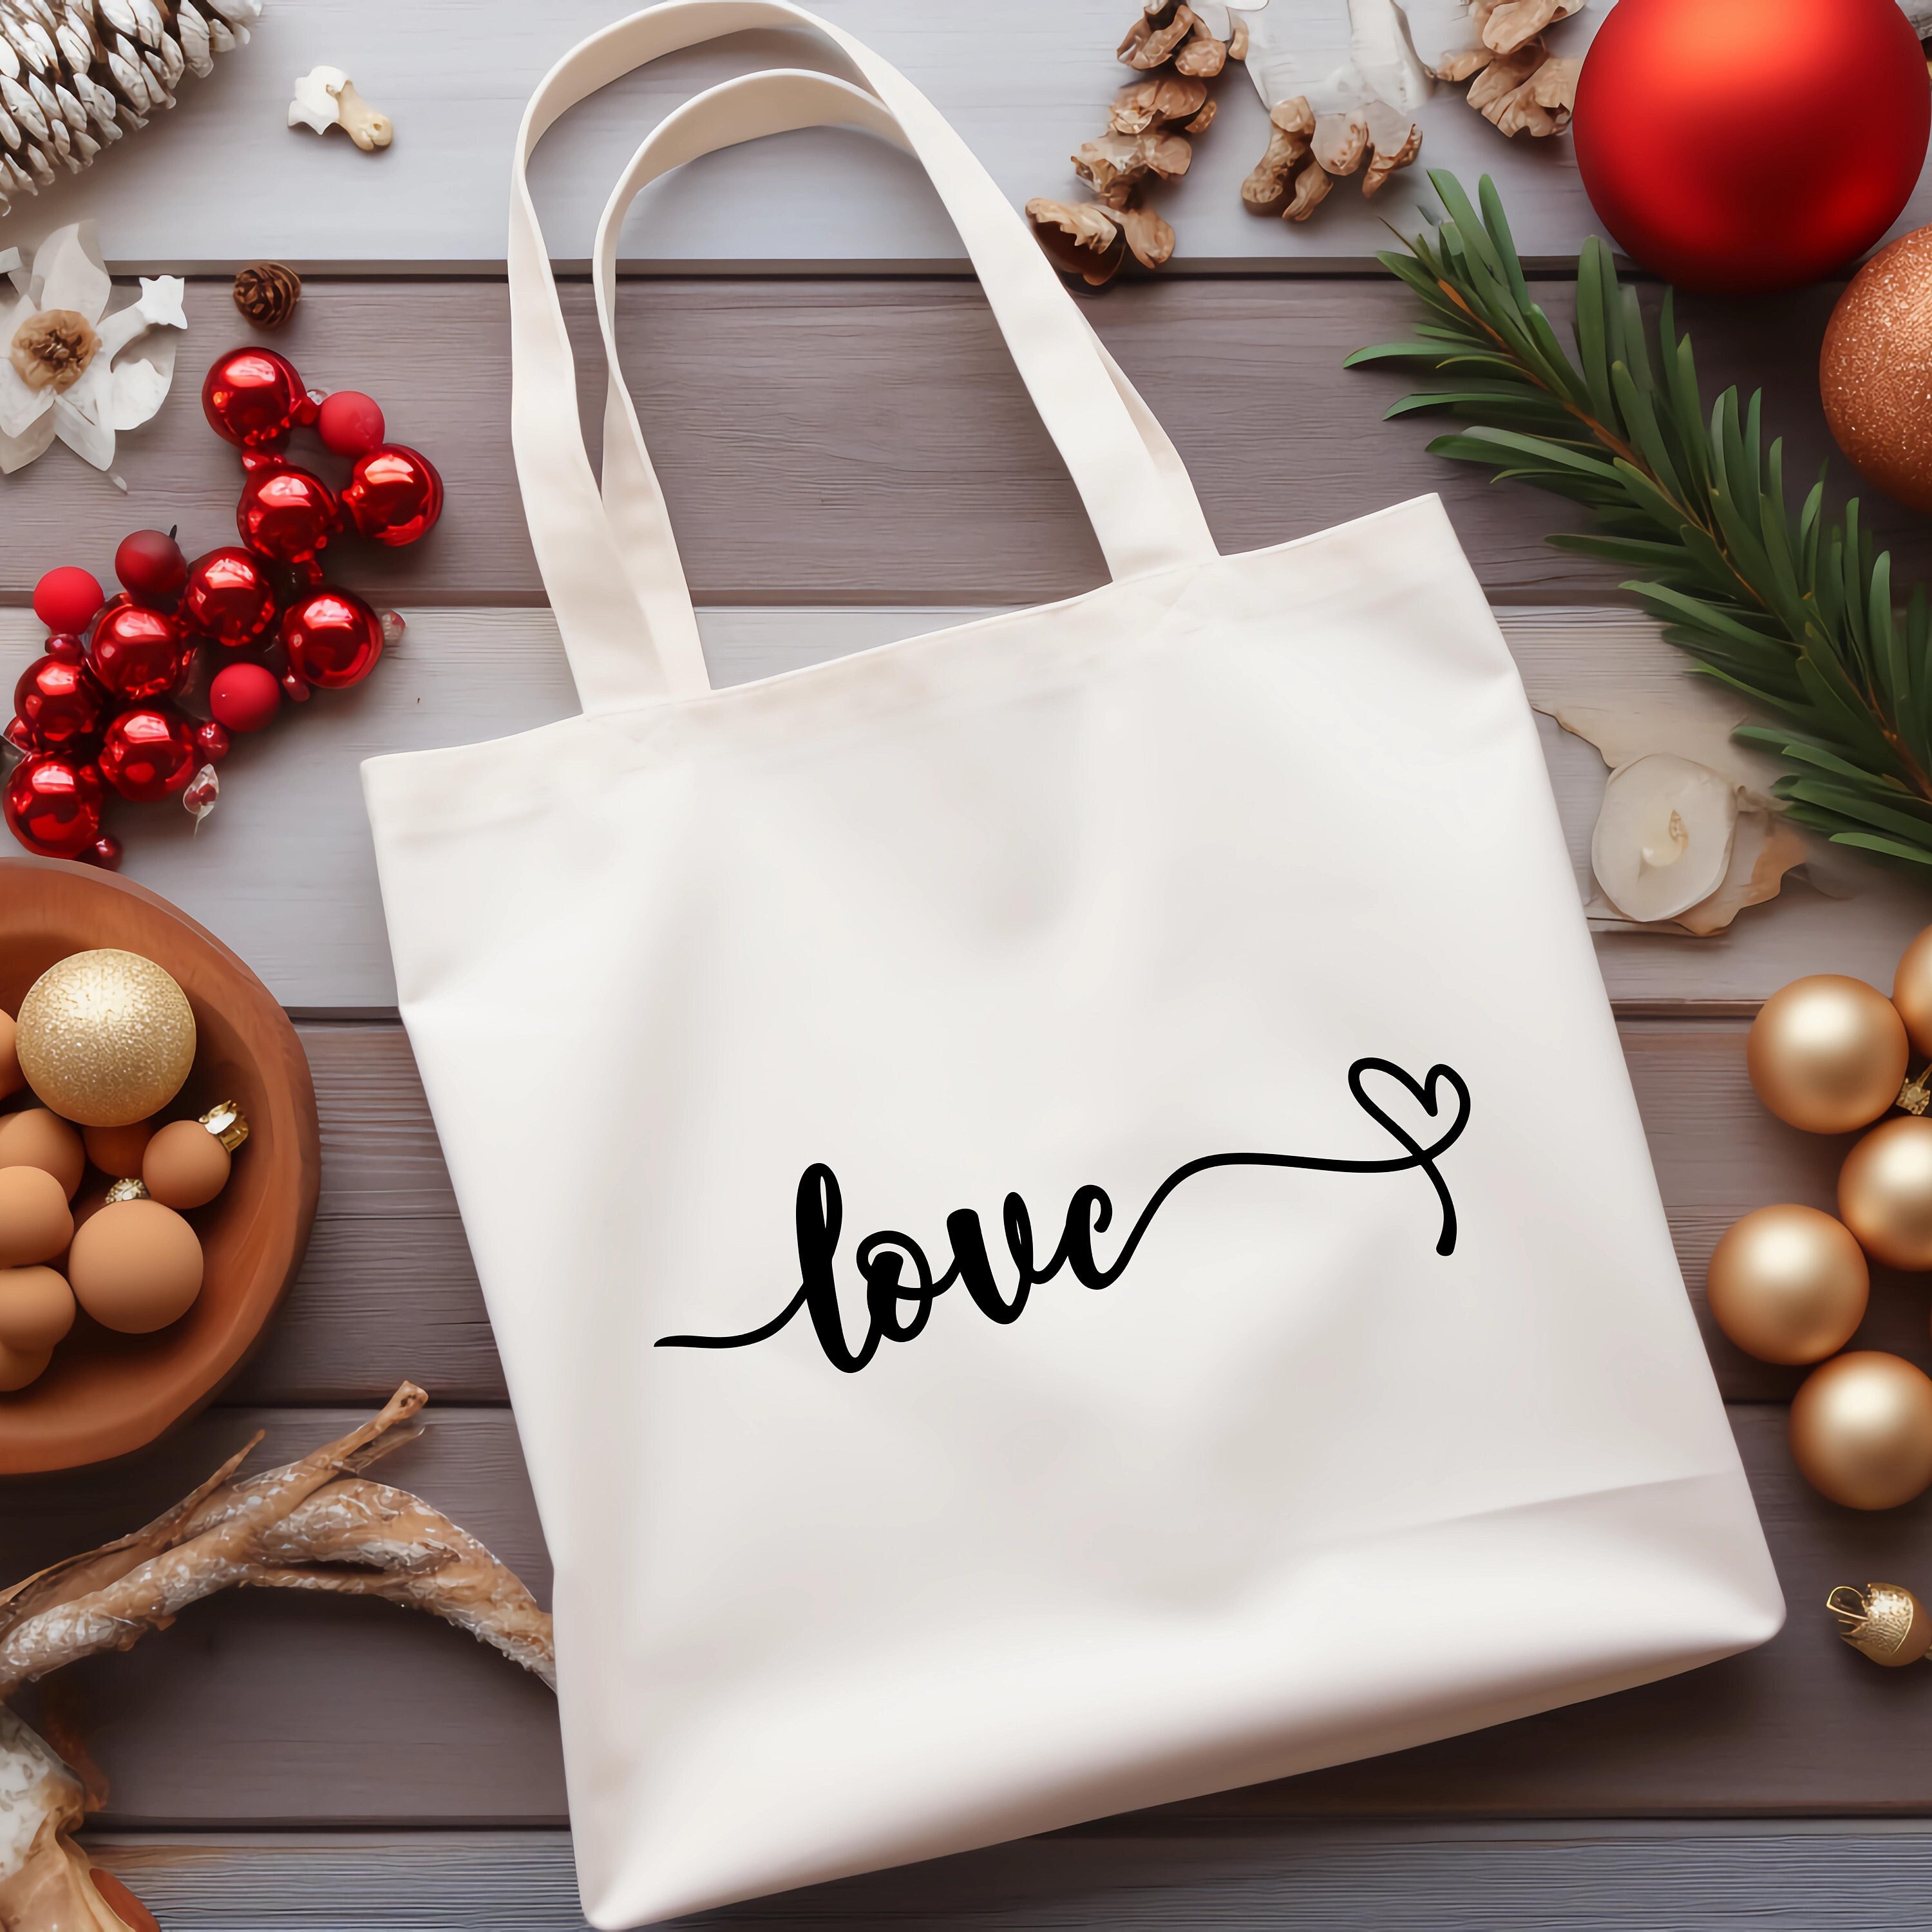 We Love You To Pieces Personalized Large Canvas Tote Bag